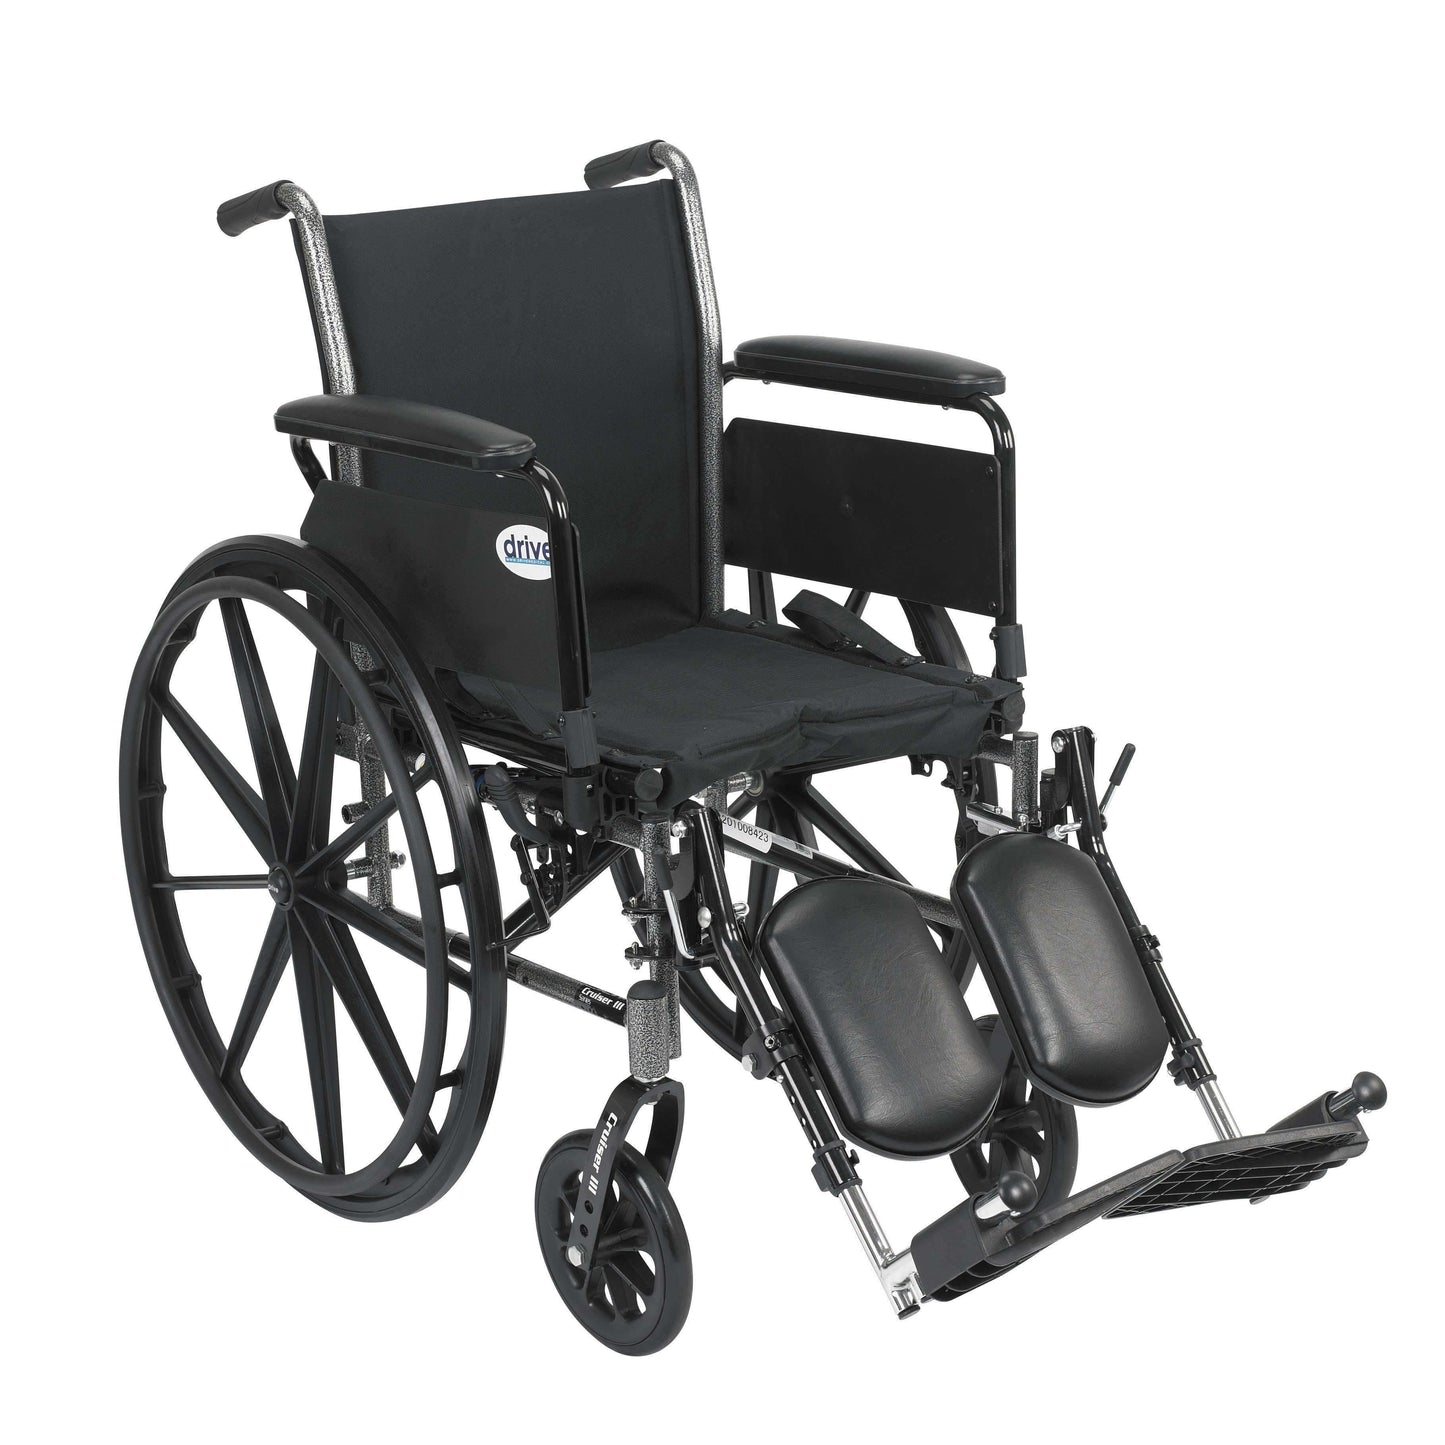 Drive k318dfa-elr Cruiser III Light Weight Wheelchair with Flip Back Removable Arms, Full Arms, Elevating Leg Rests, 18" Seat